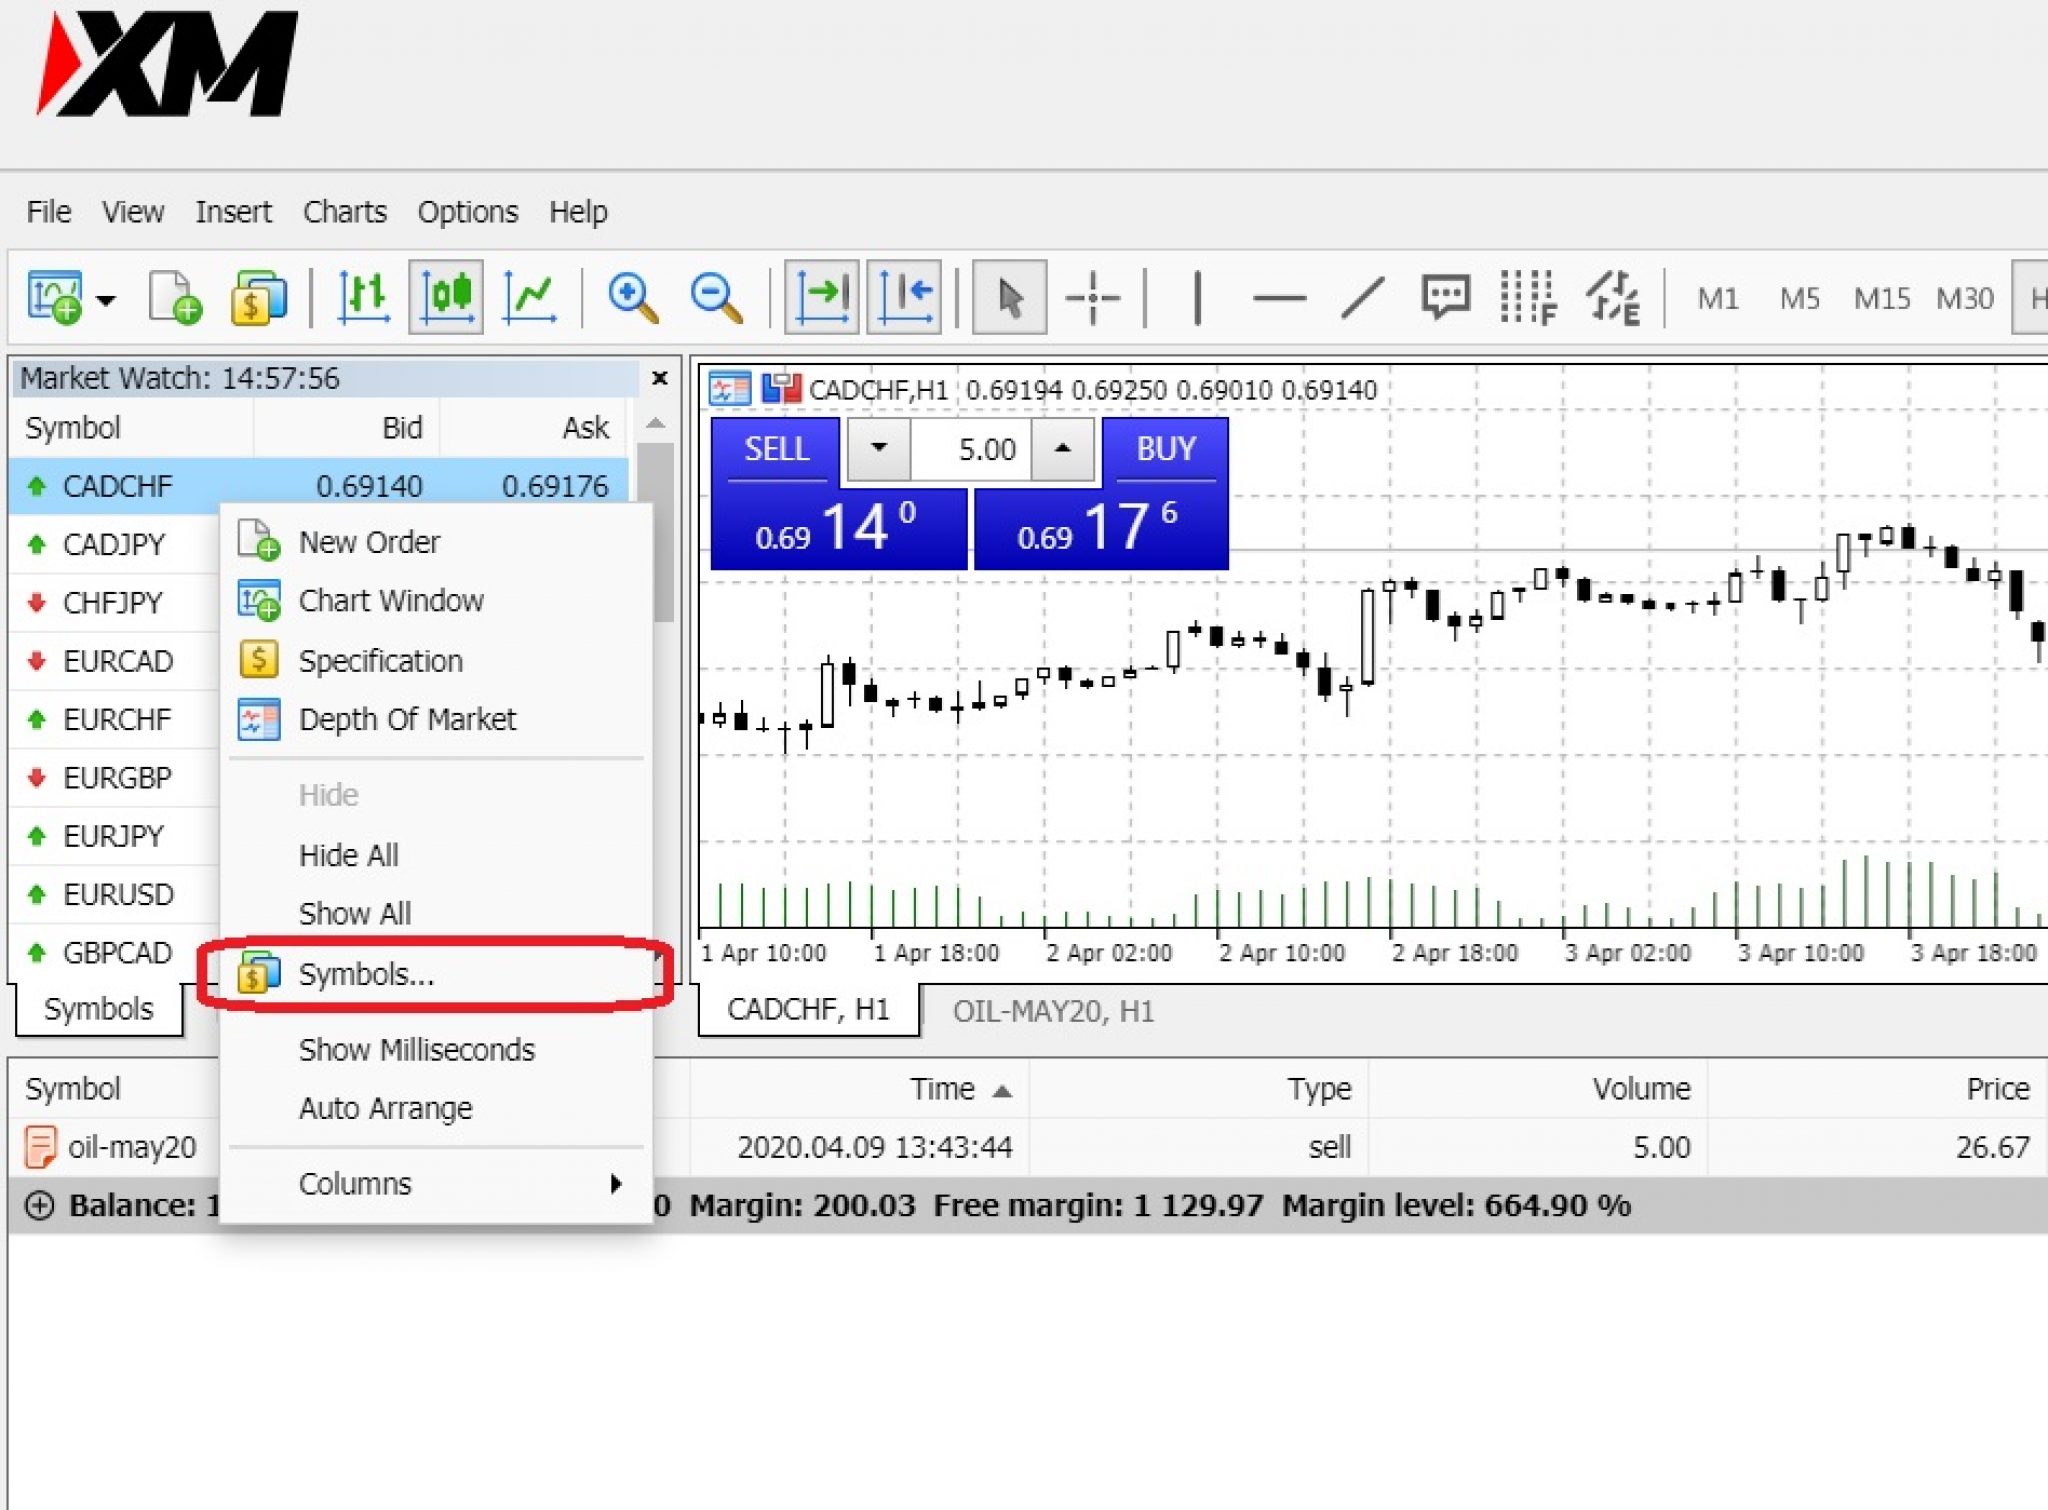 XM Broker | Crude Oil Trading | Commodities Futures Prices